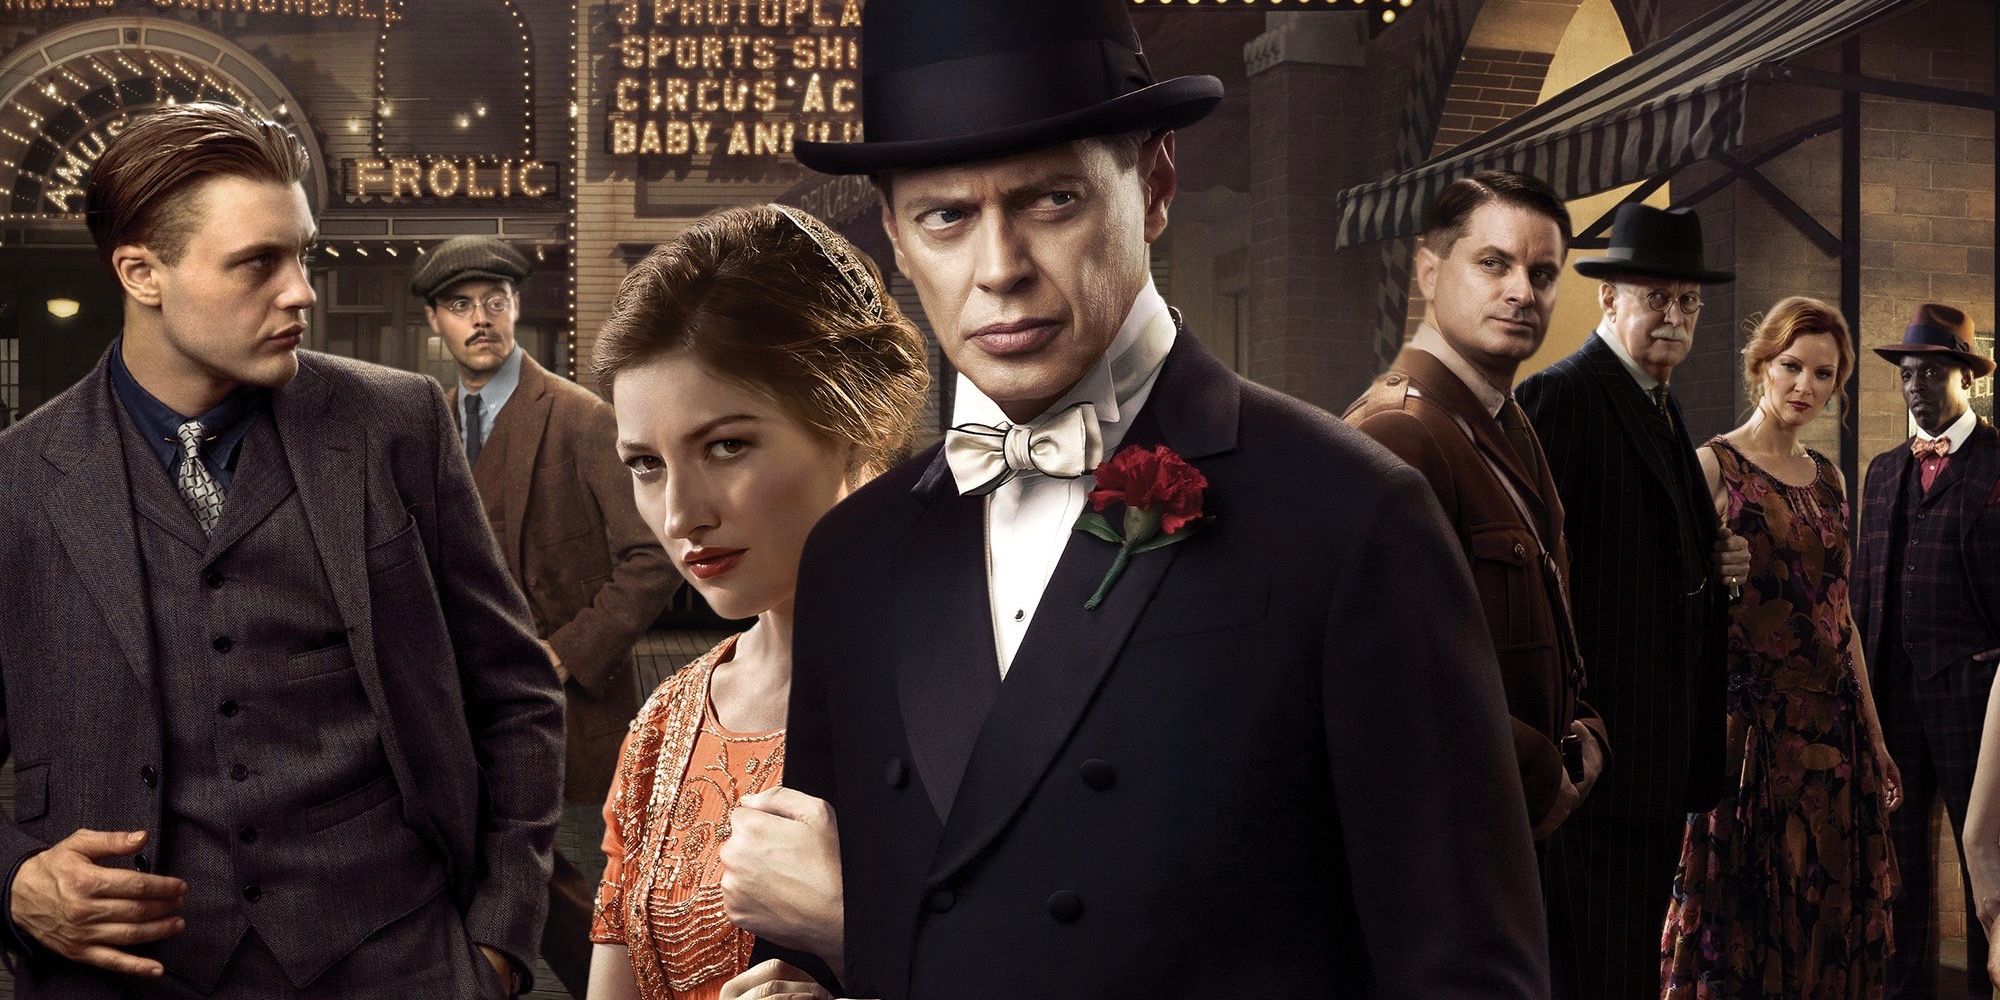 hbo Boardwalk Empire Kelly Macdonald holding Steve Buscemi surrounded by Michael Pitt and others 